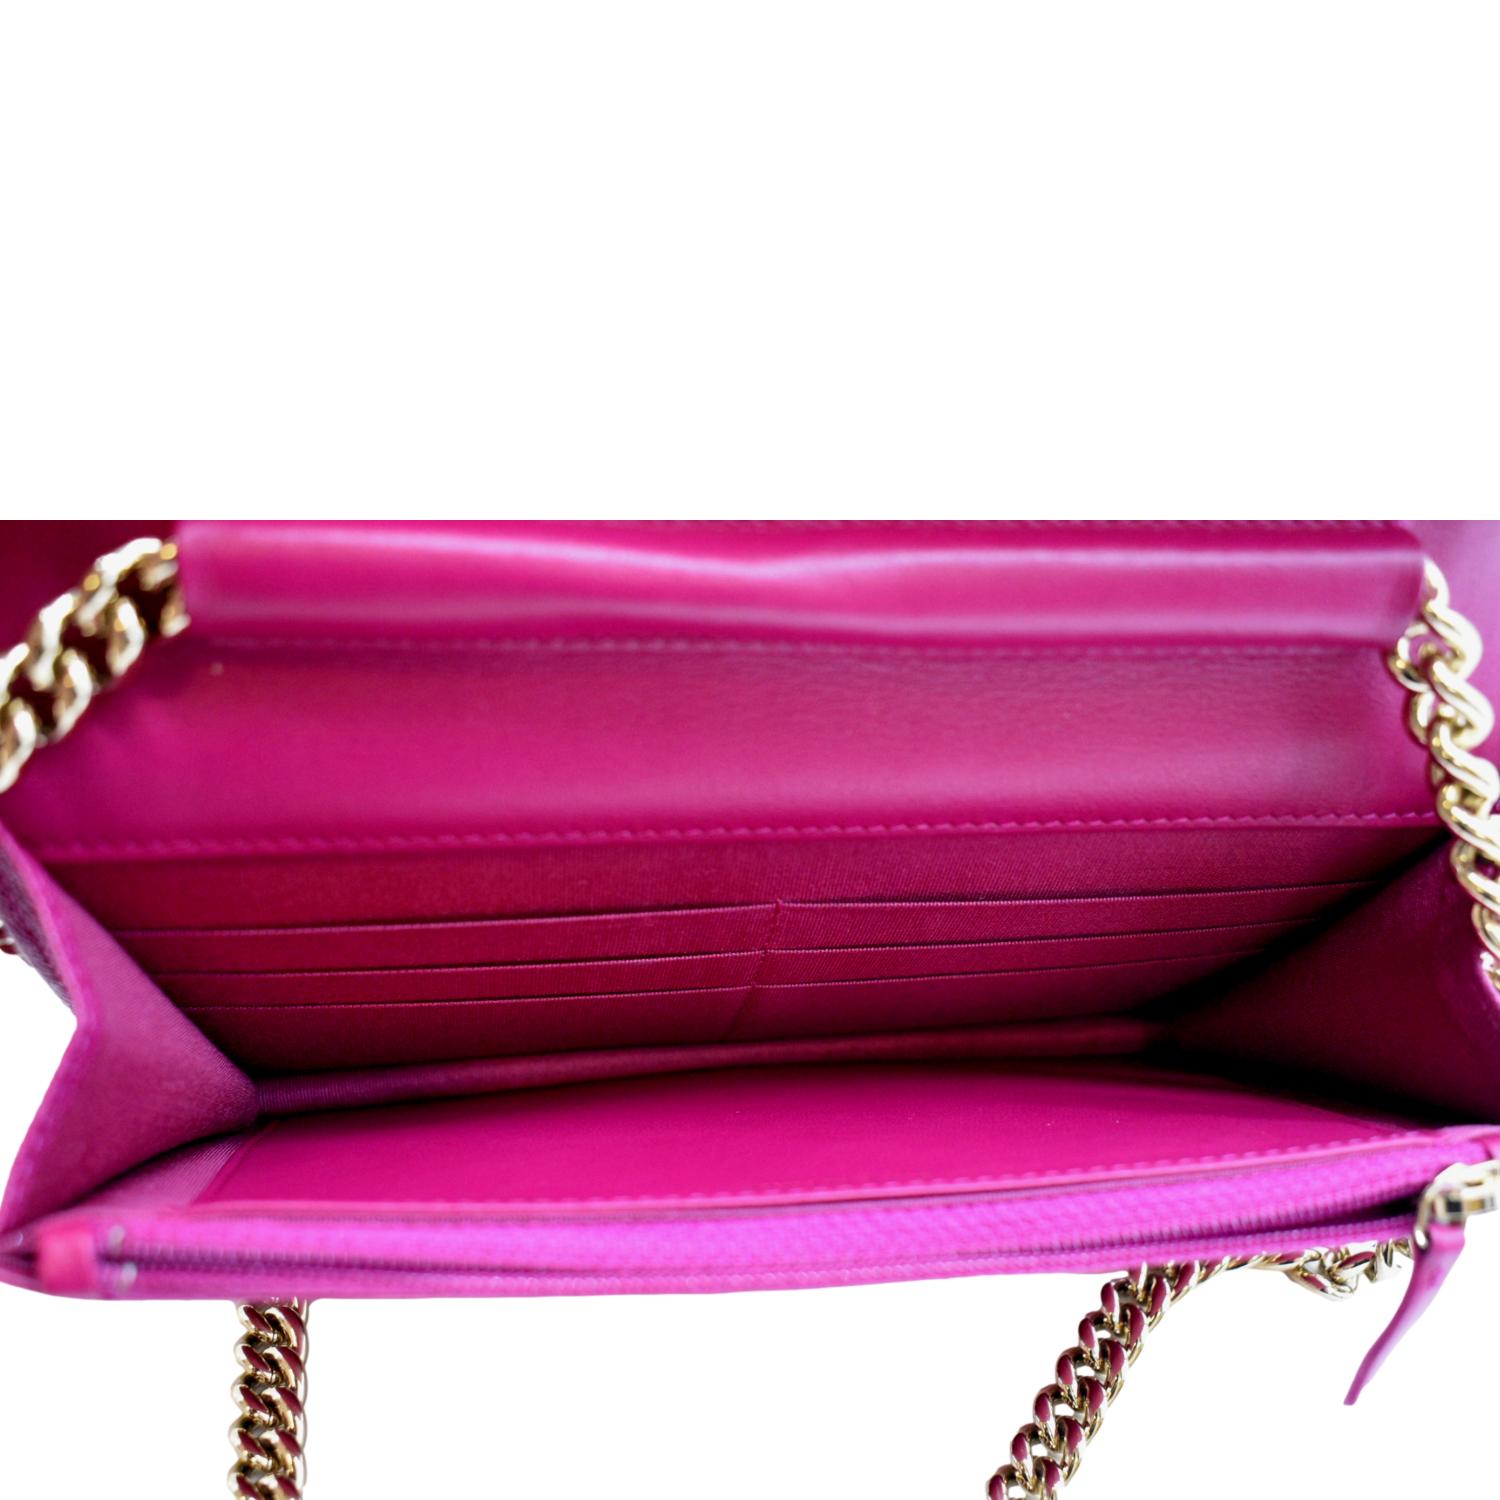 CHANEL Lambskin Quilted Boy Wallet On Chain WOC Pink | FASHIONPHILE